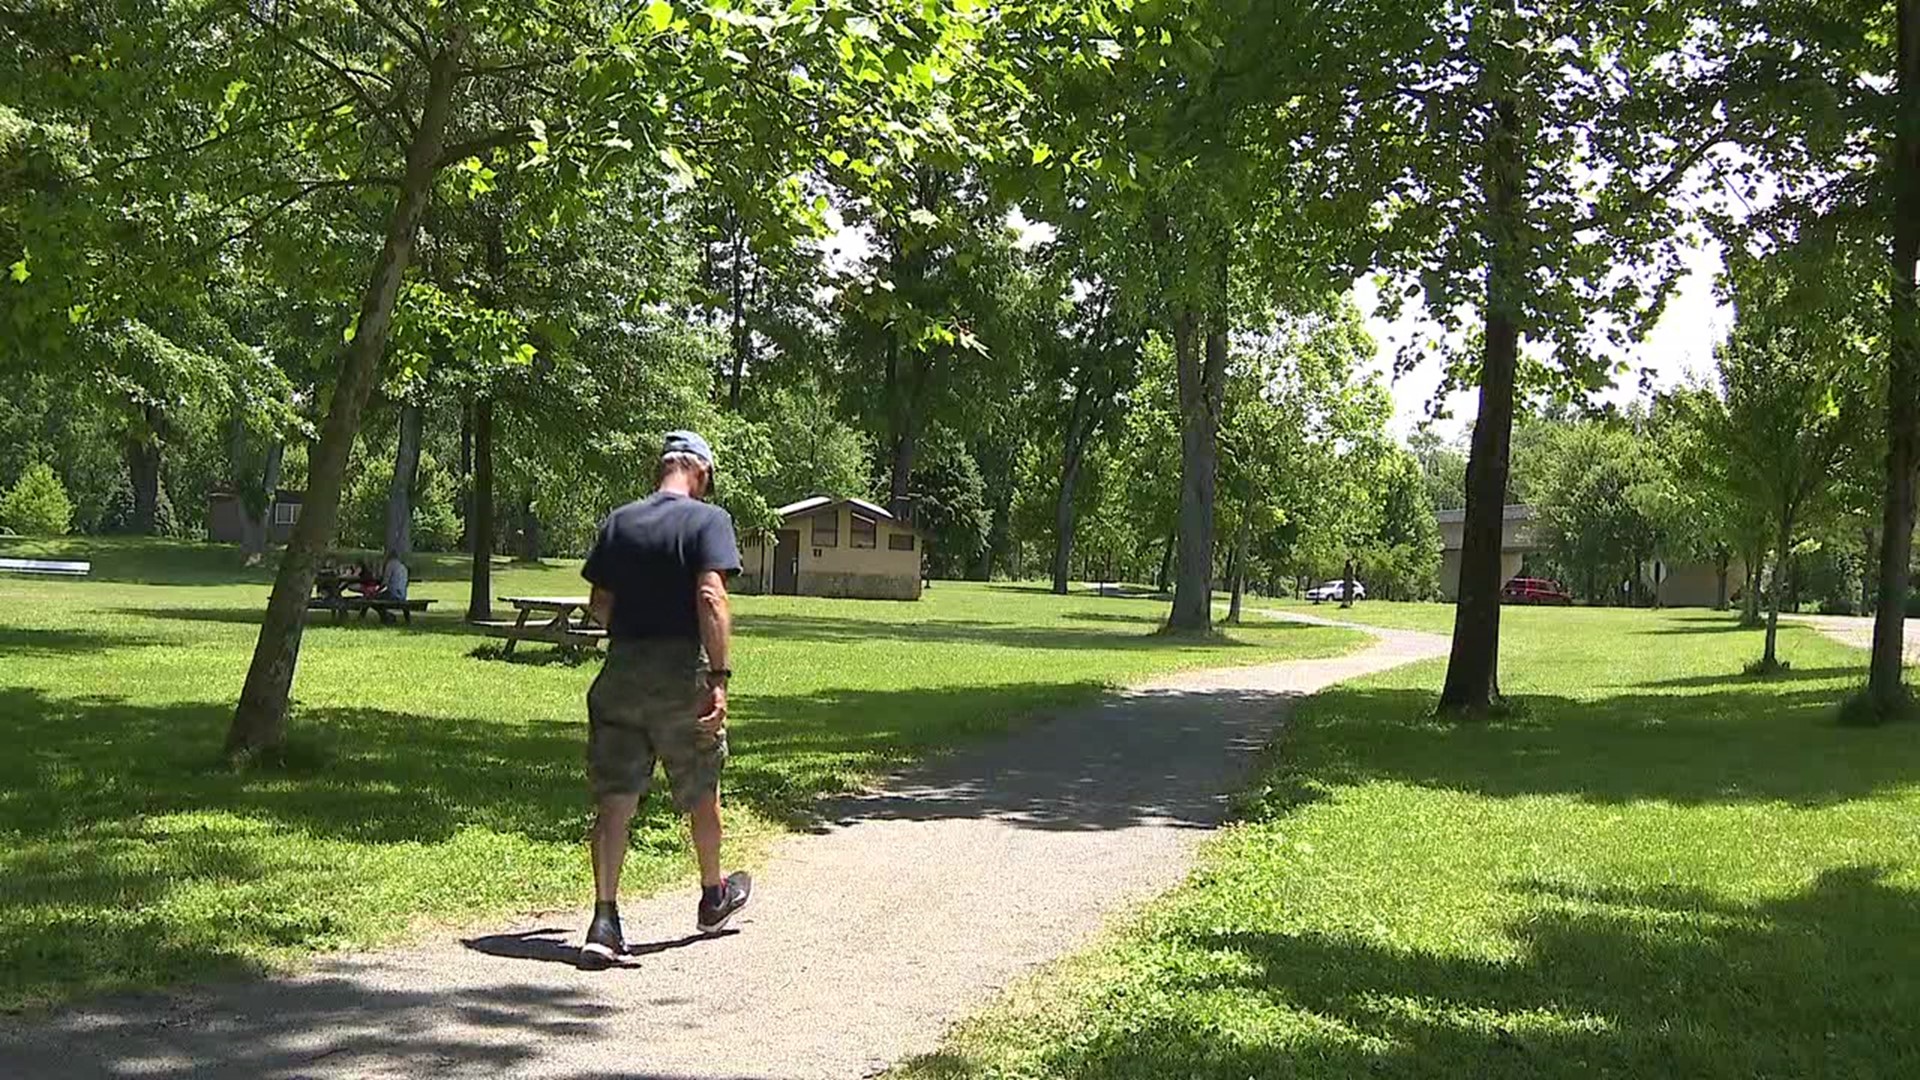 A nonprofit in Milton wants you to get outside and walk. The Improved Milton Experience is holding a social distancing walk now through Labor Day.